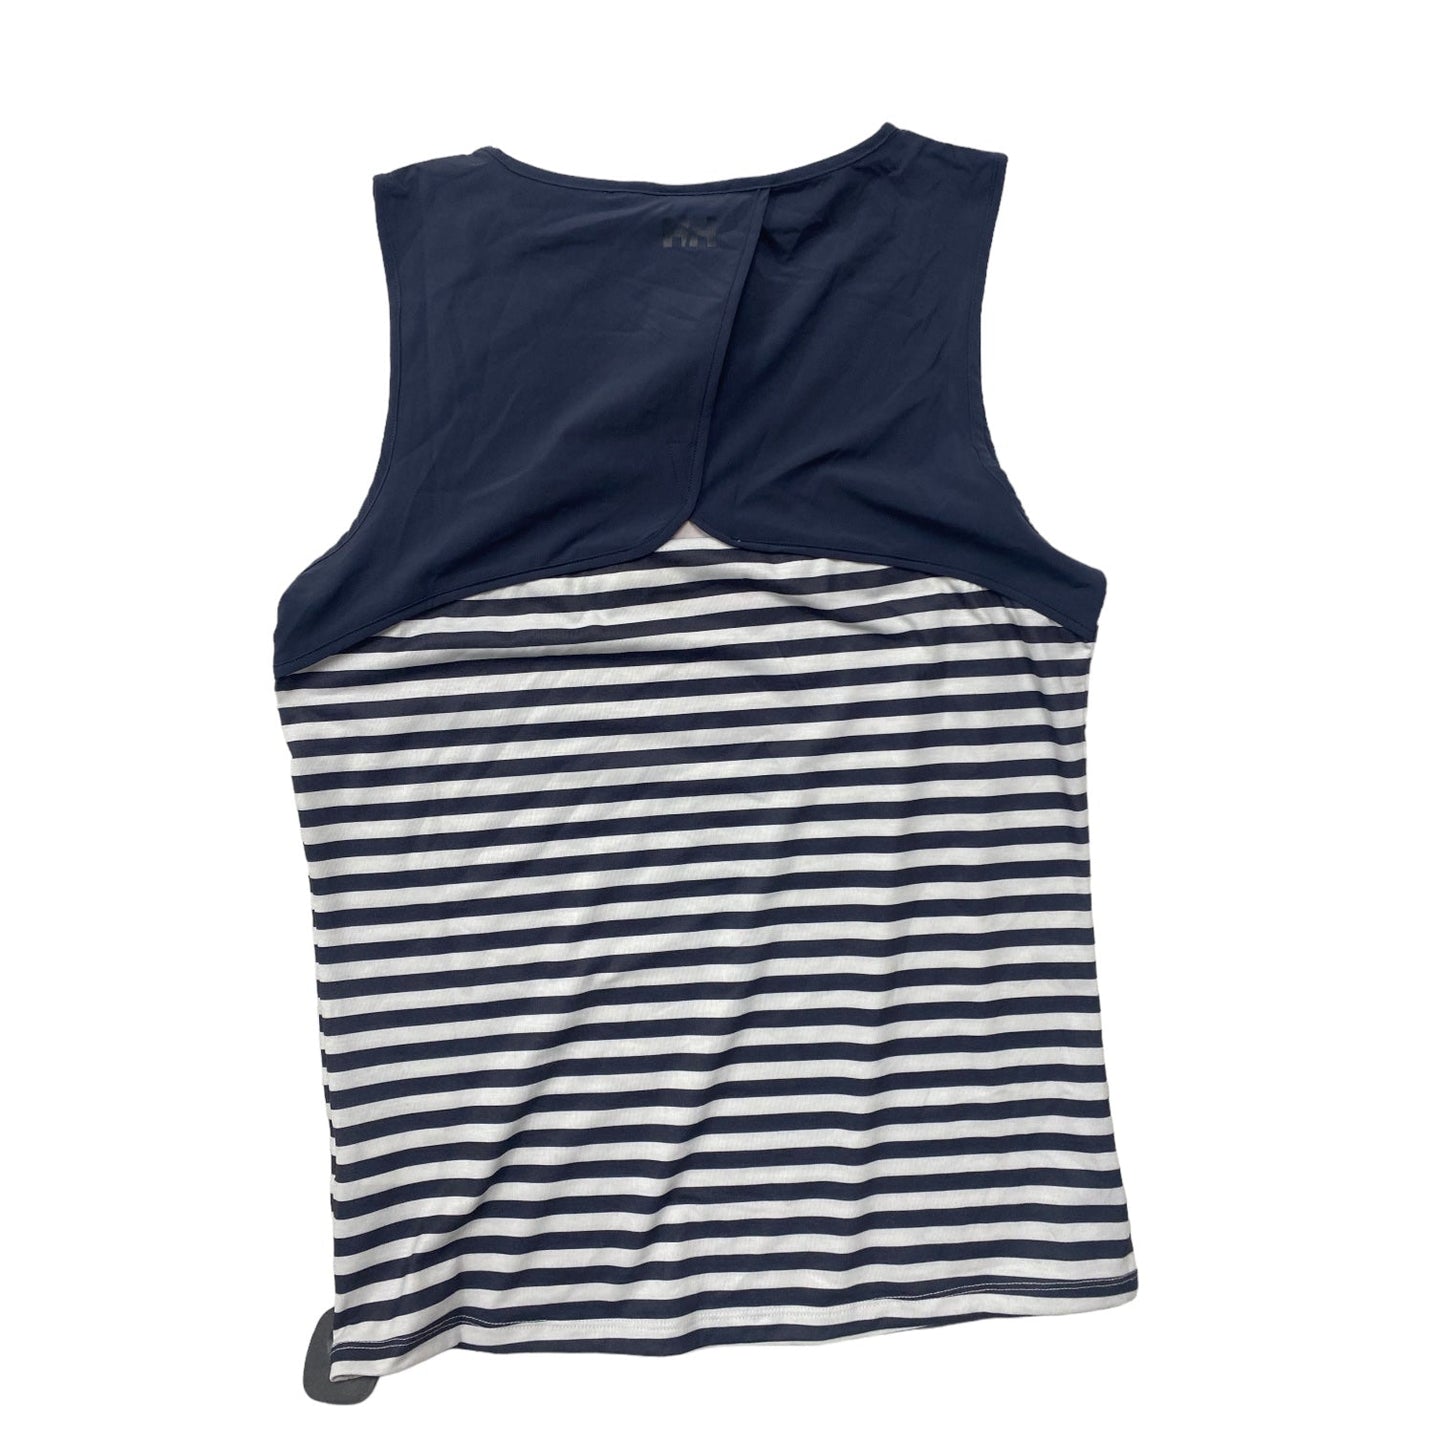 Striped Pattern Athletic Tank Top Helly Hansen, Size M